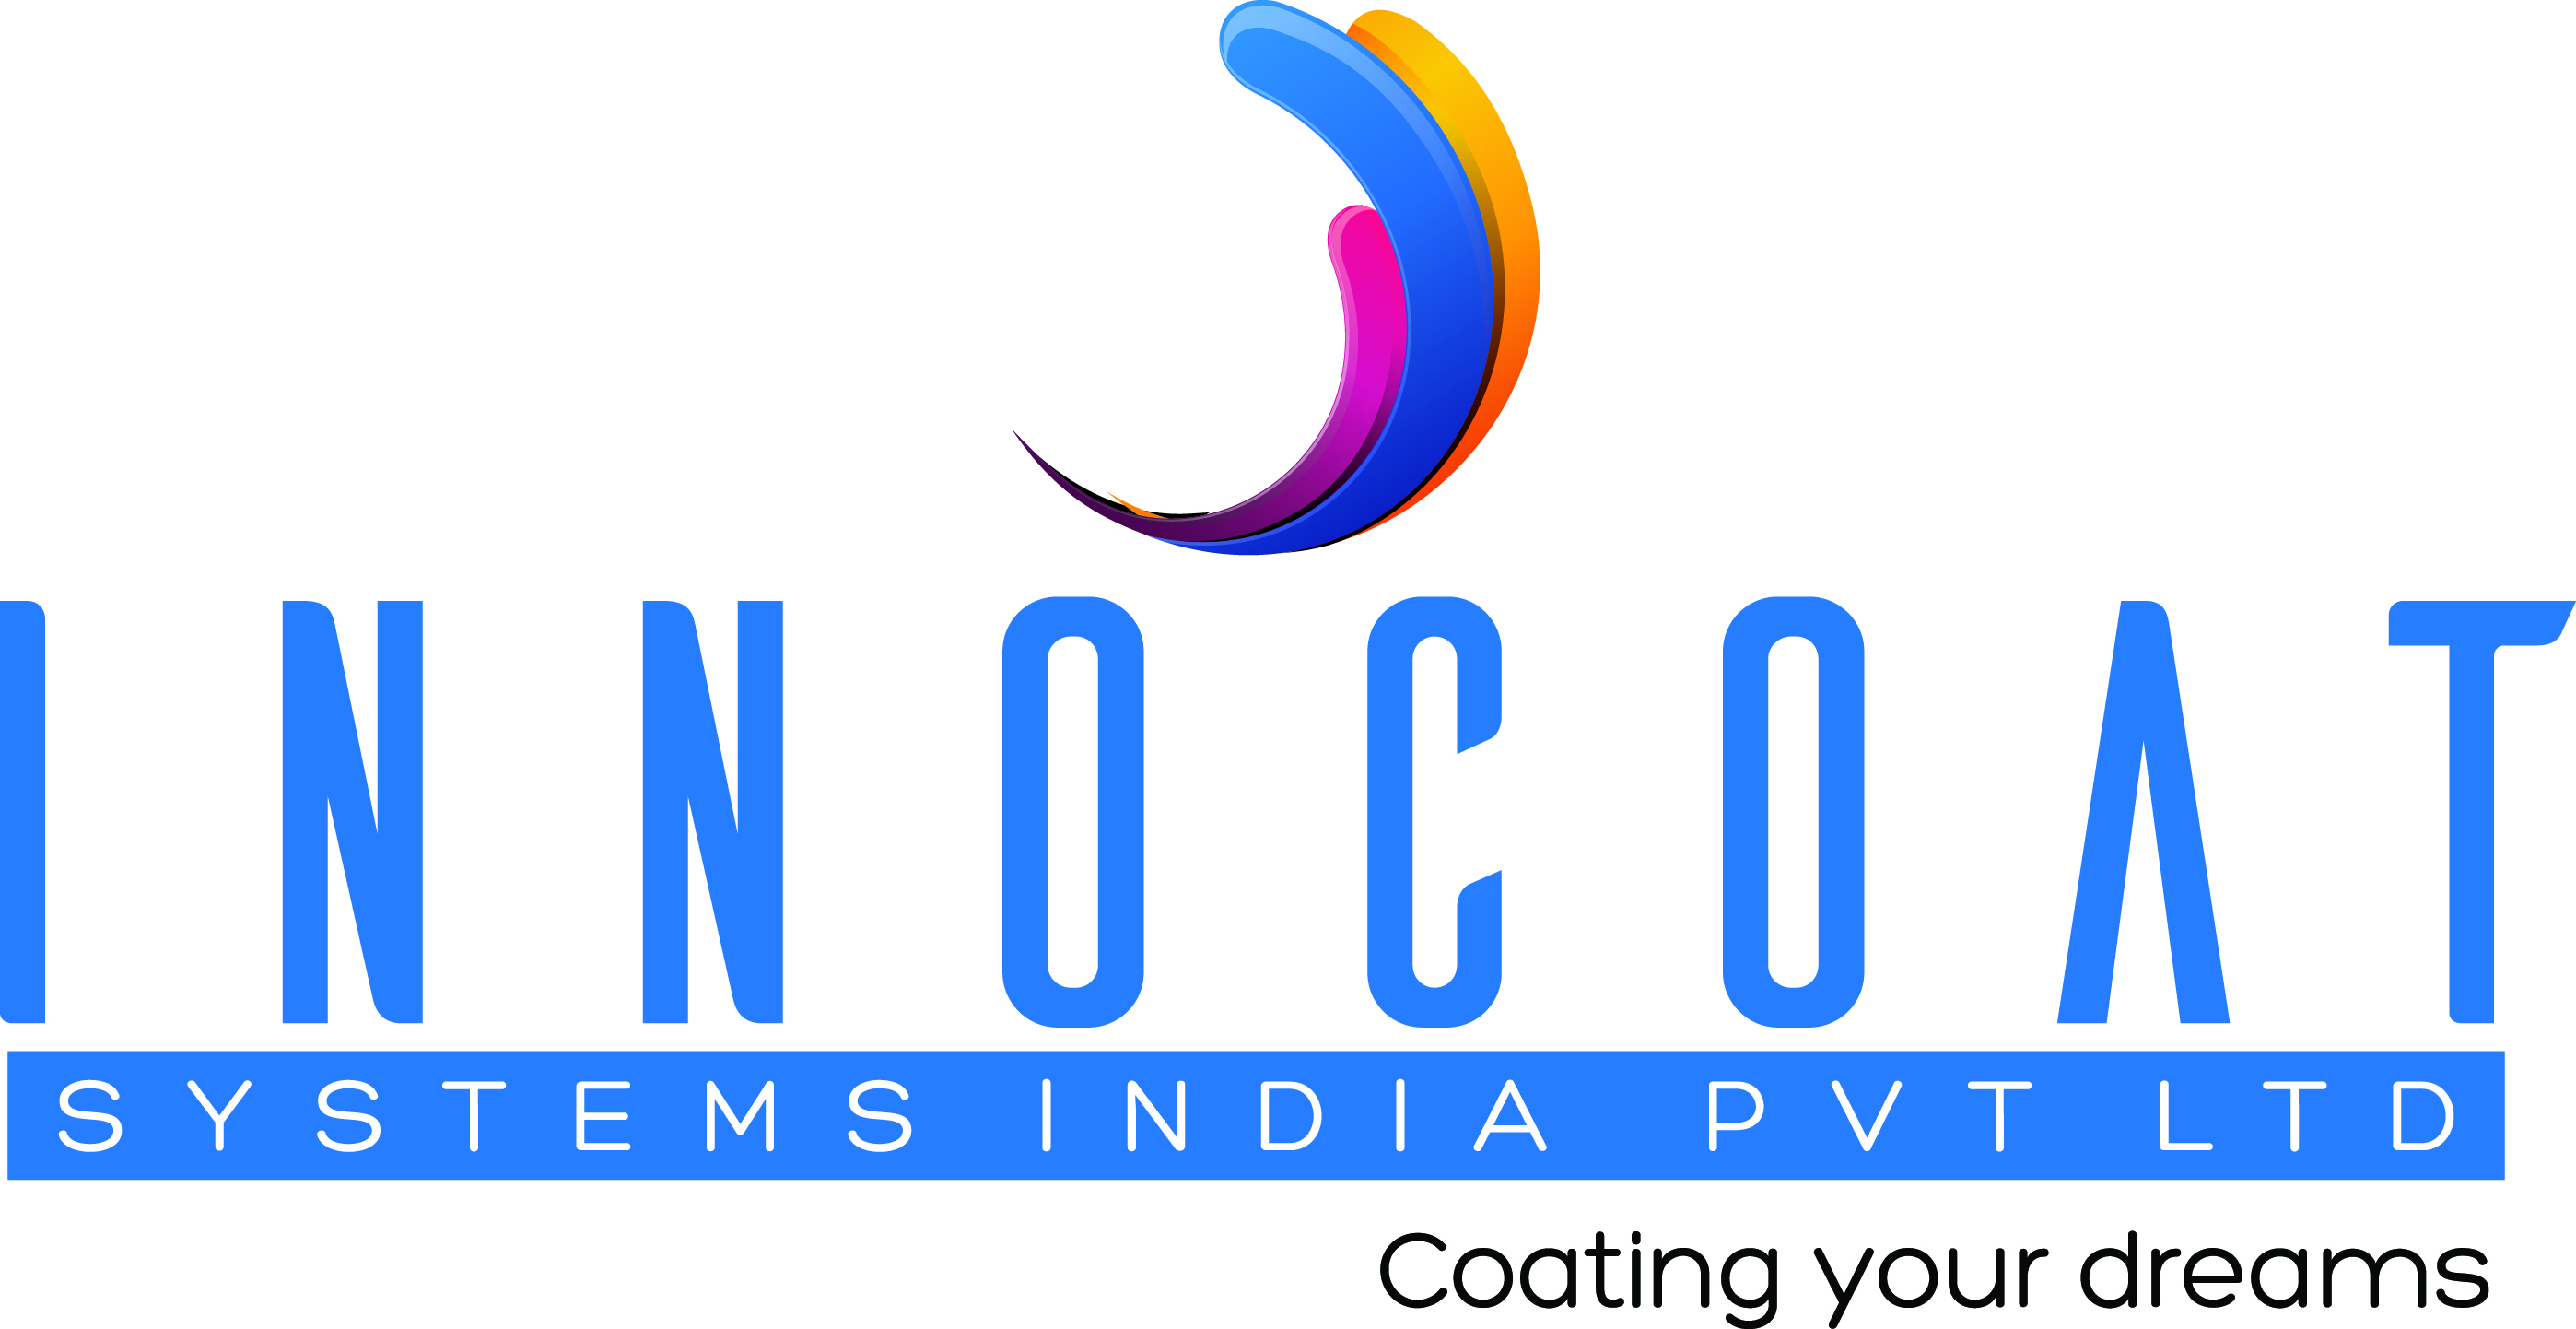 Innocoat Systems